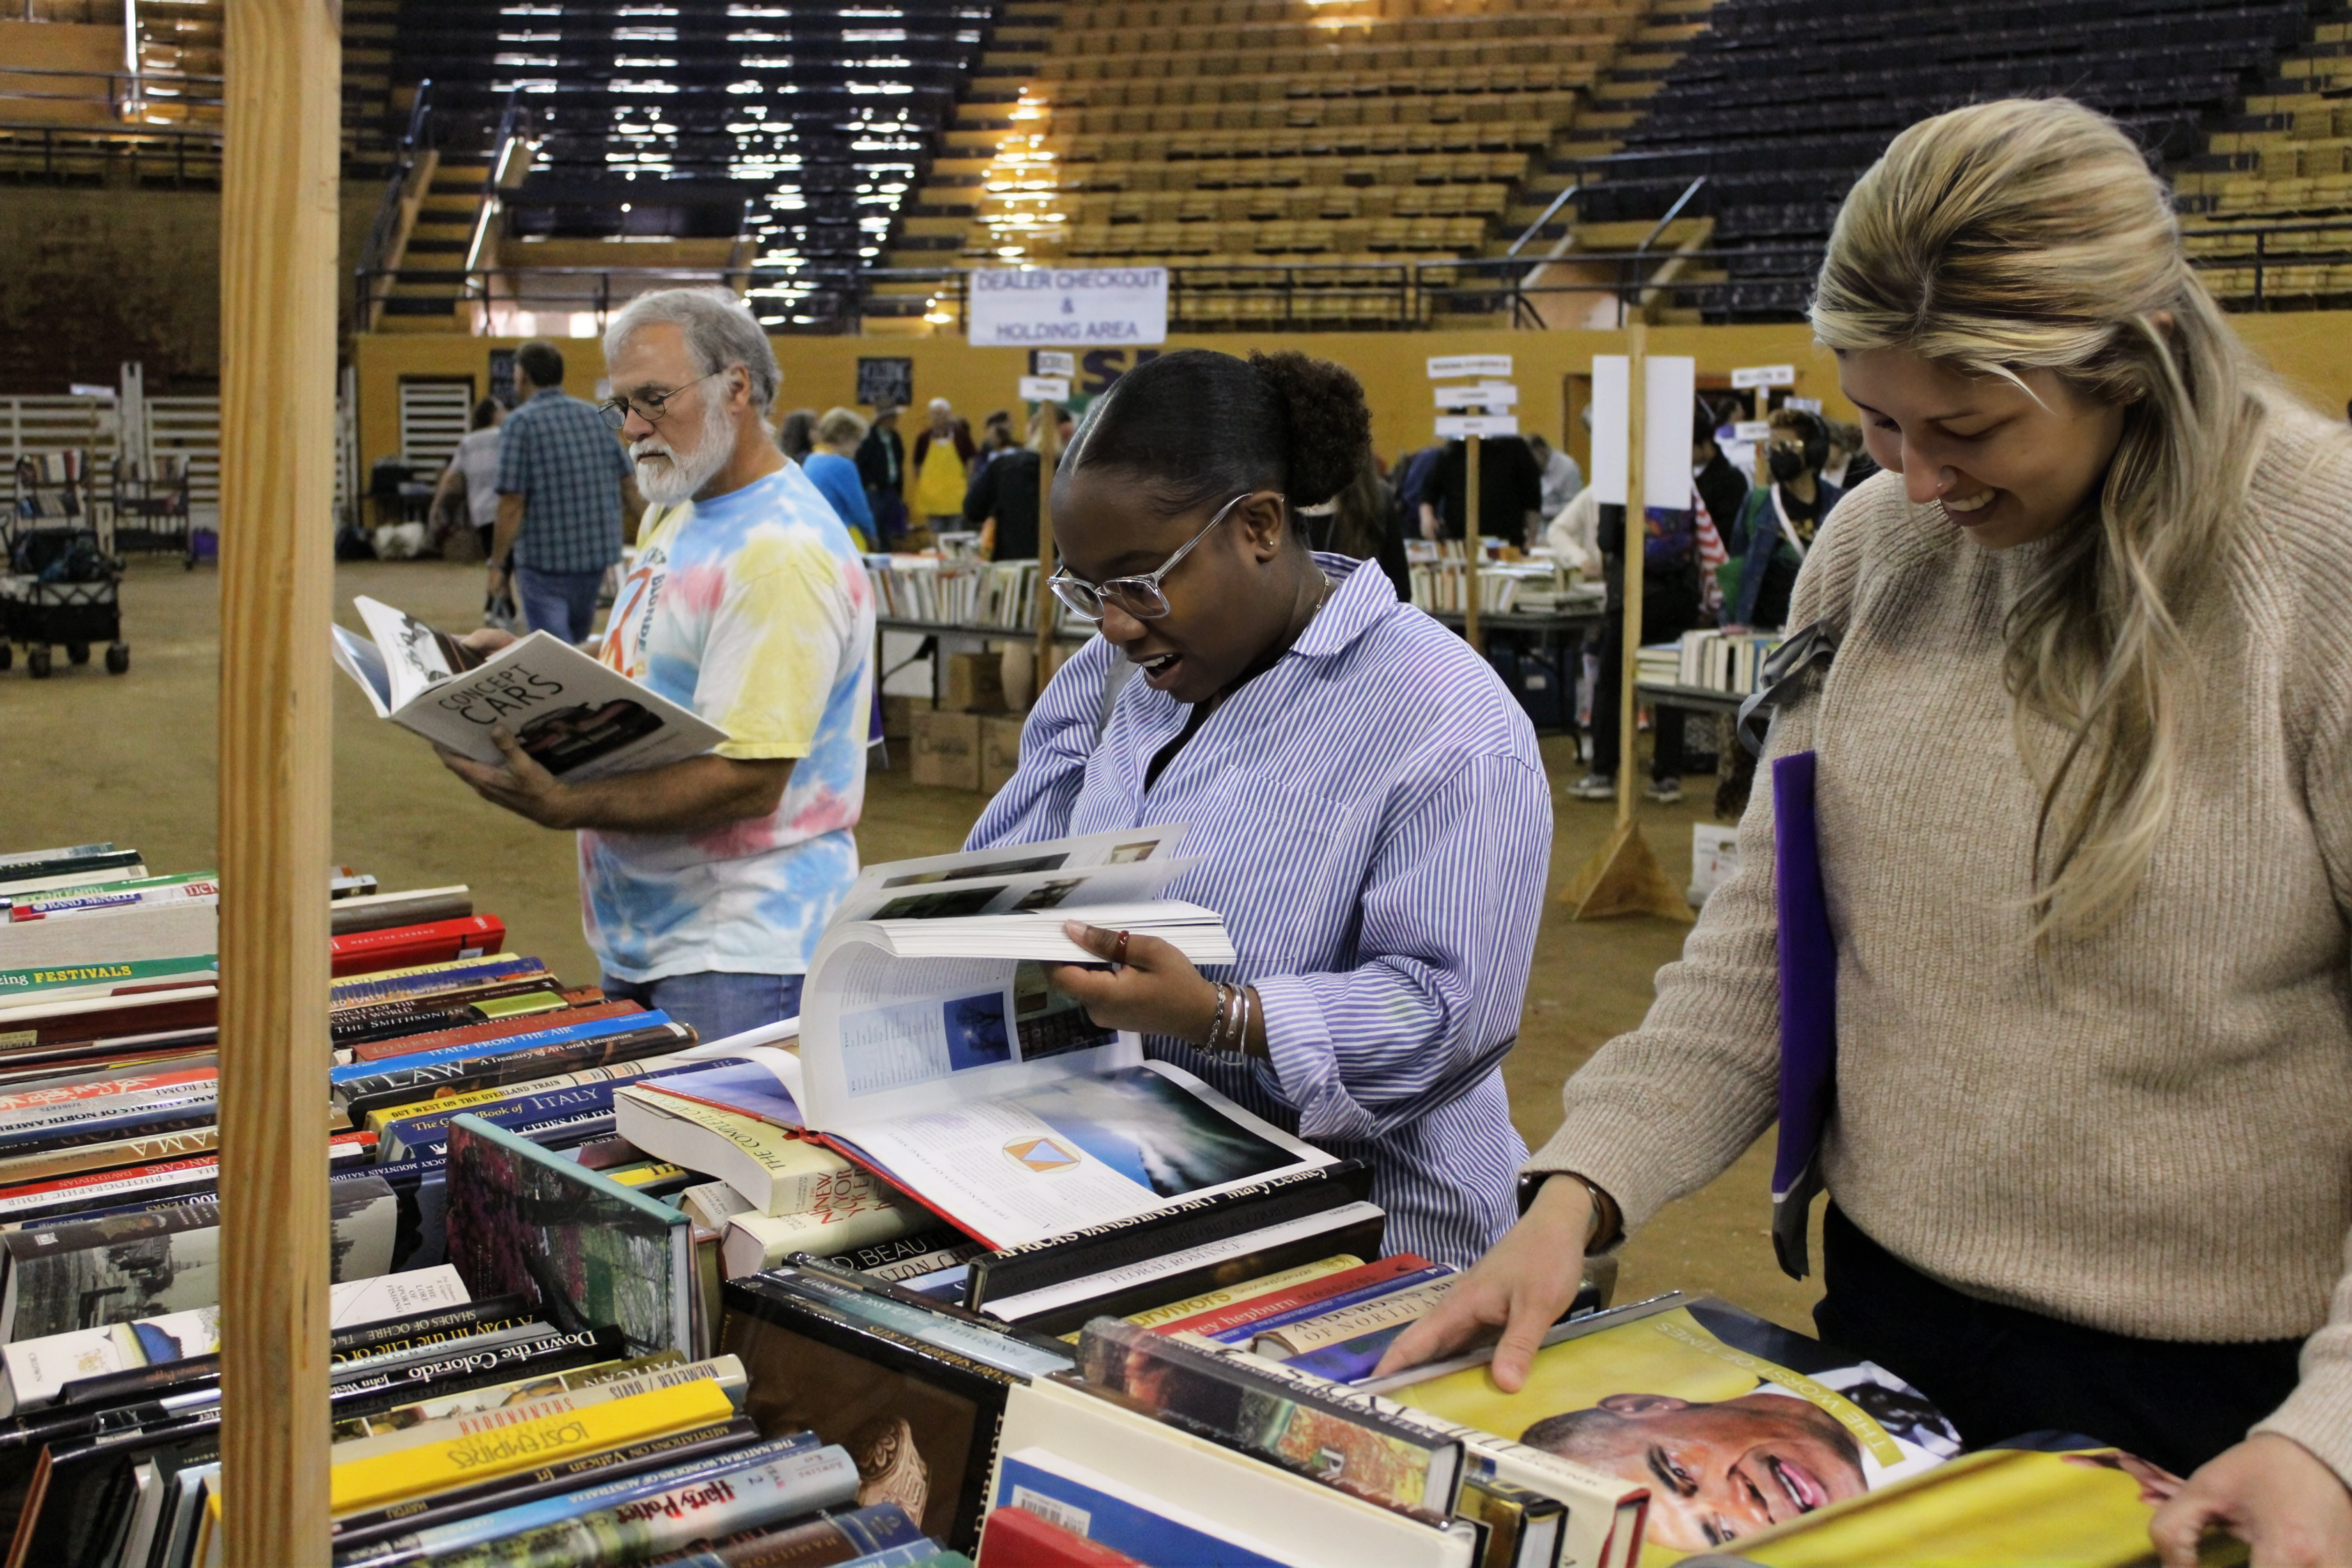 three people page through books next to a long table filled with even more titles